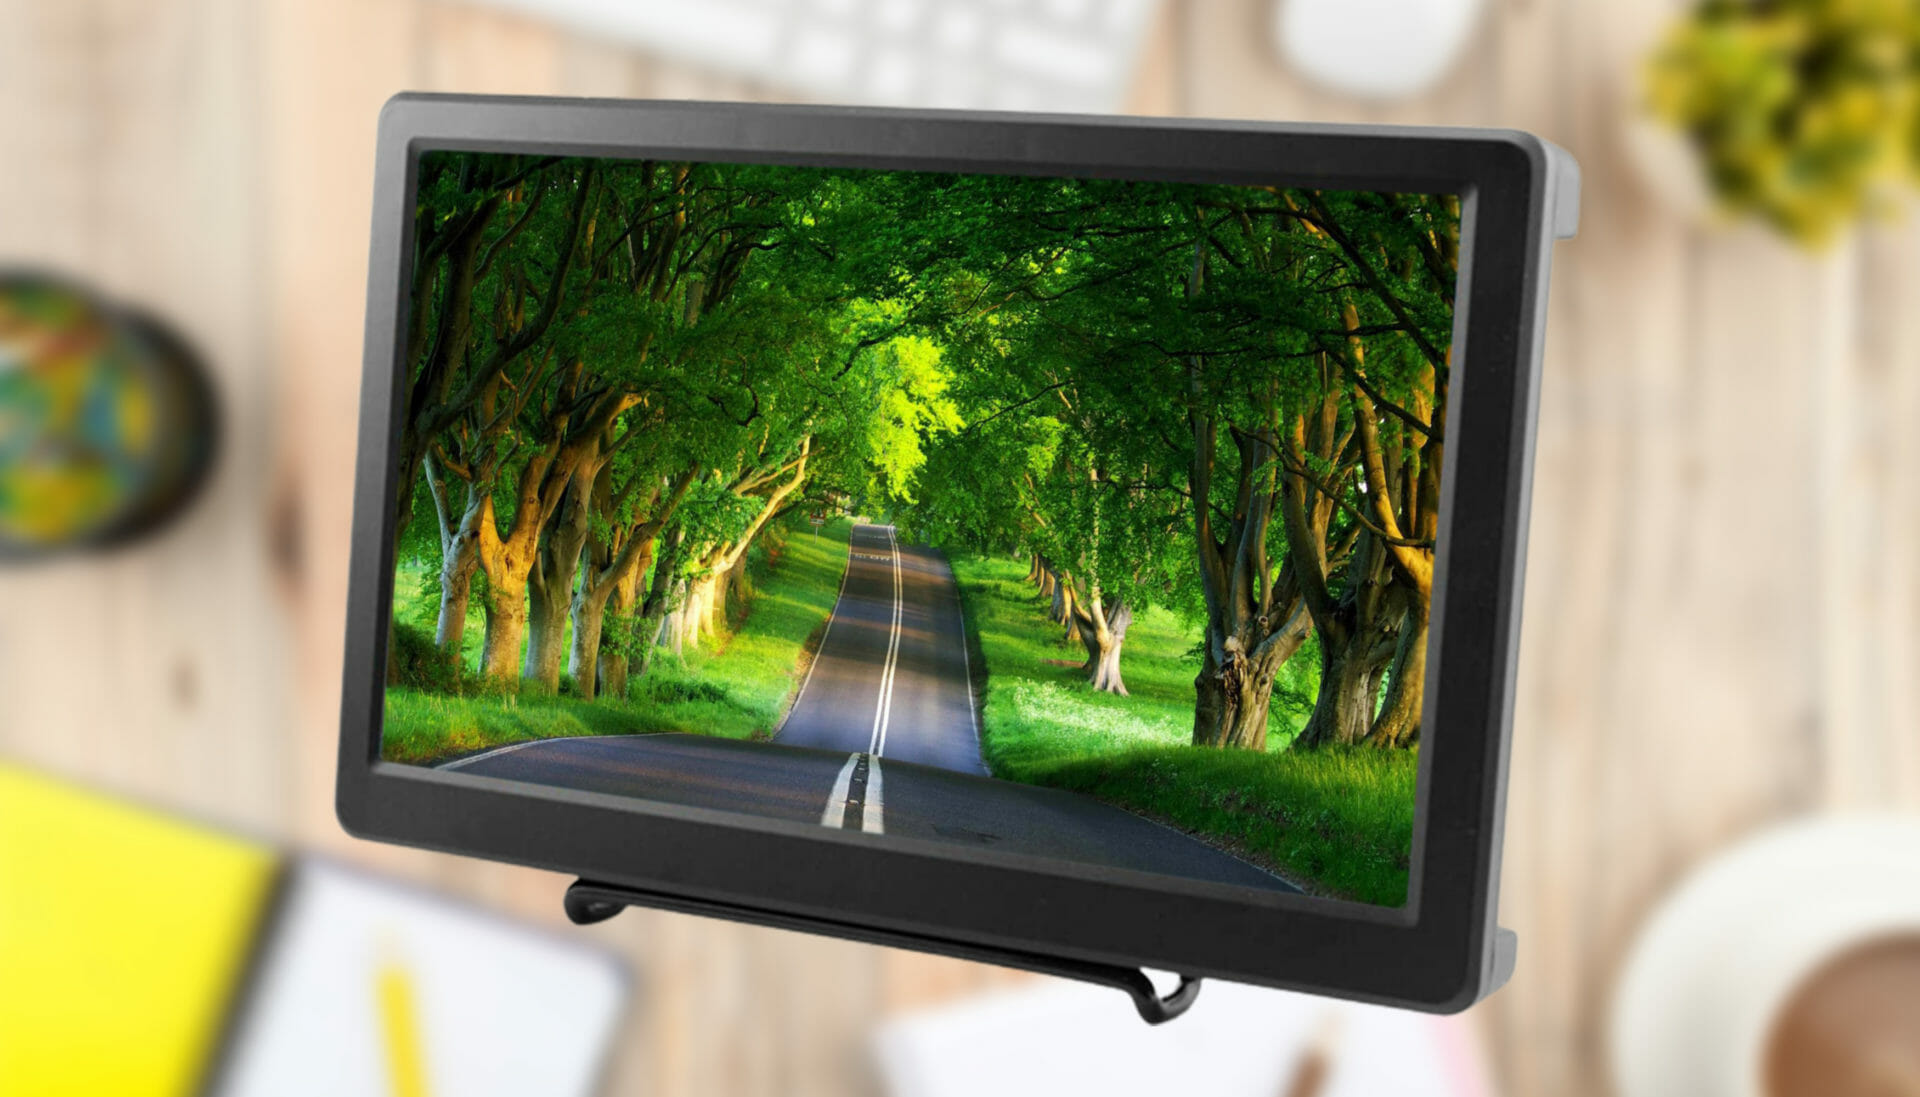 Elecrow 13.3-inch Portable Monitor with nature